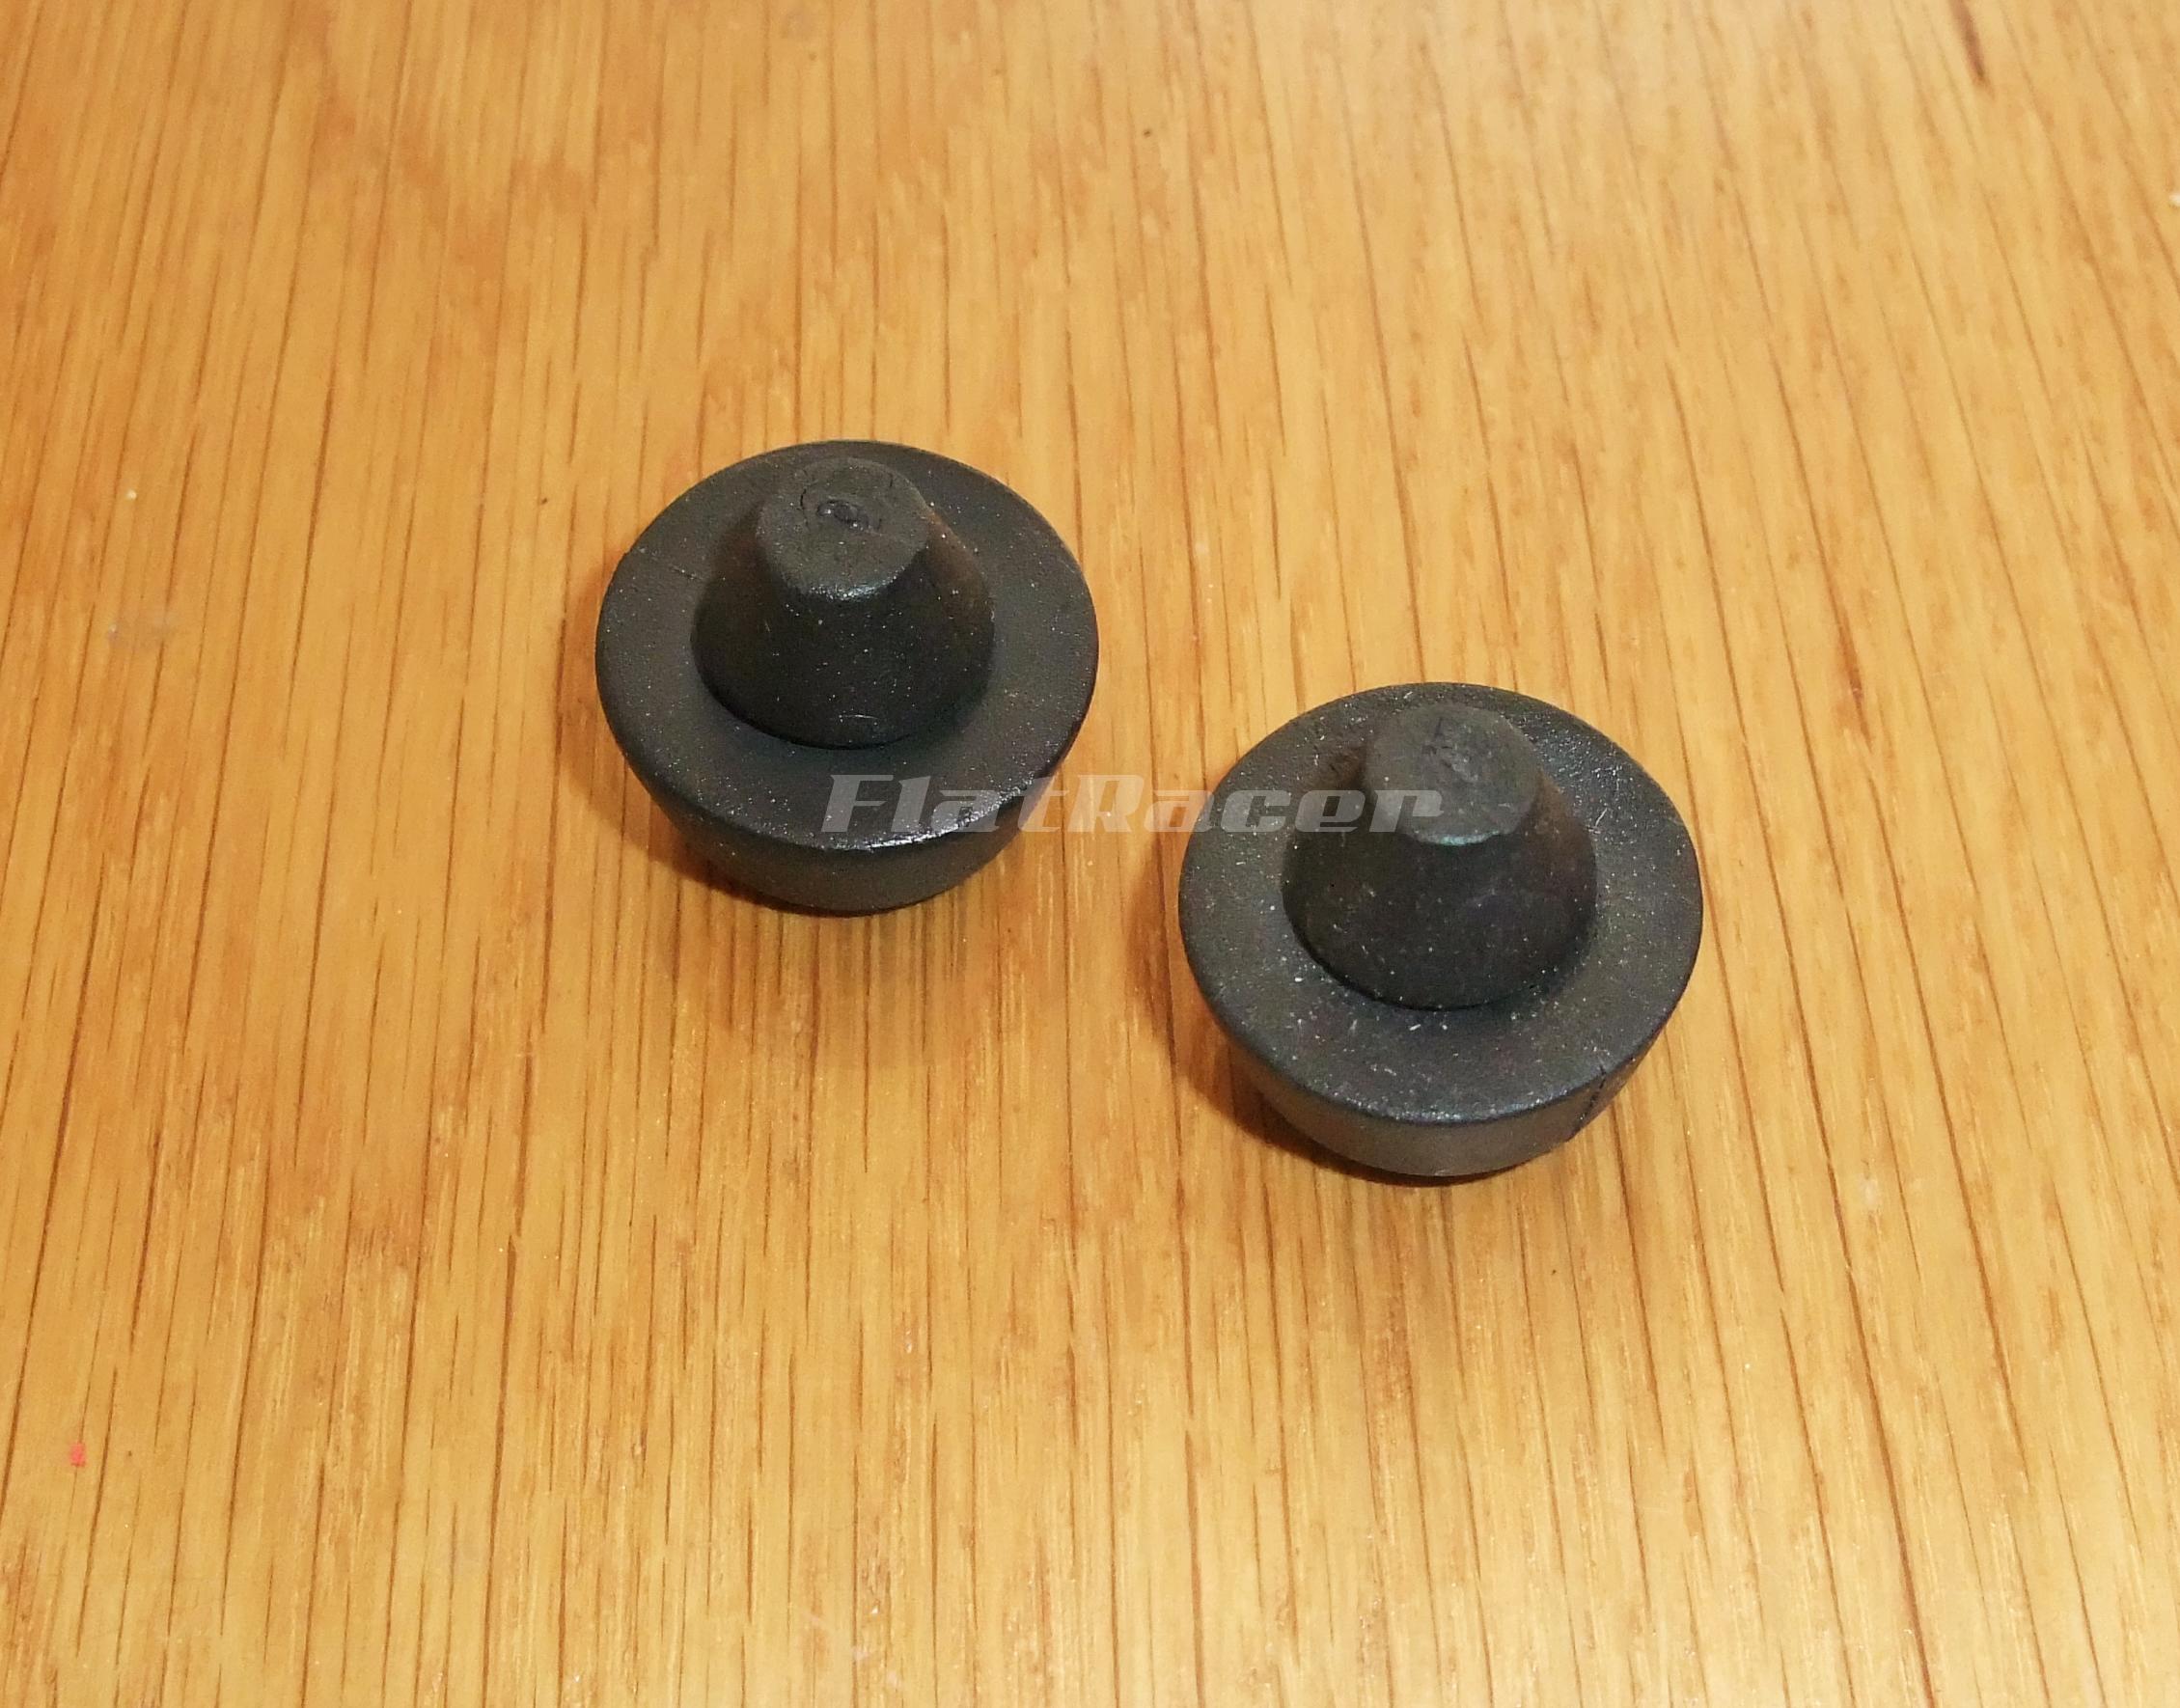 FlatRacer seat rubber buffer stops (pair) - 24 W x 11 H x 10mm hole